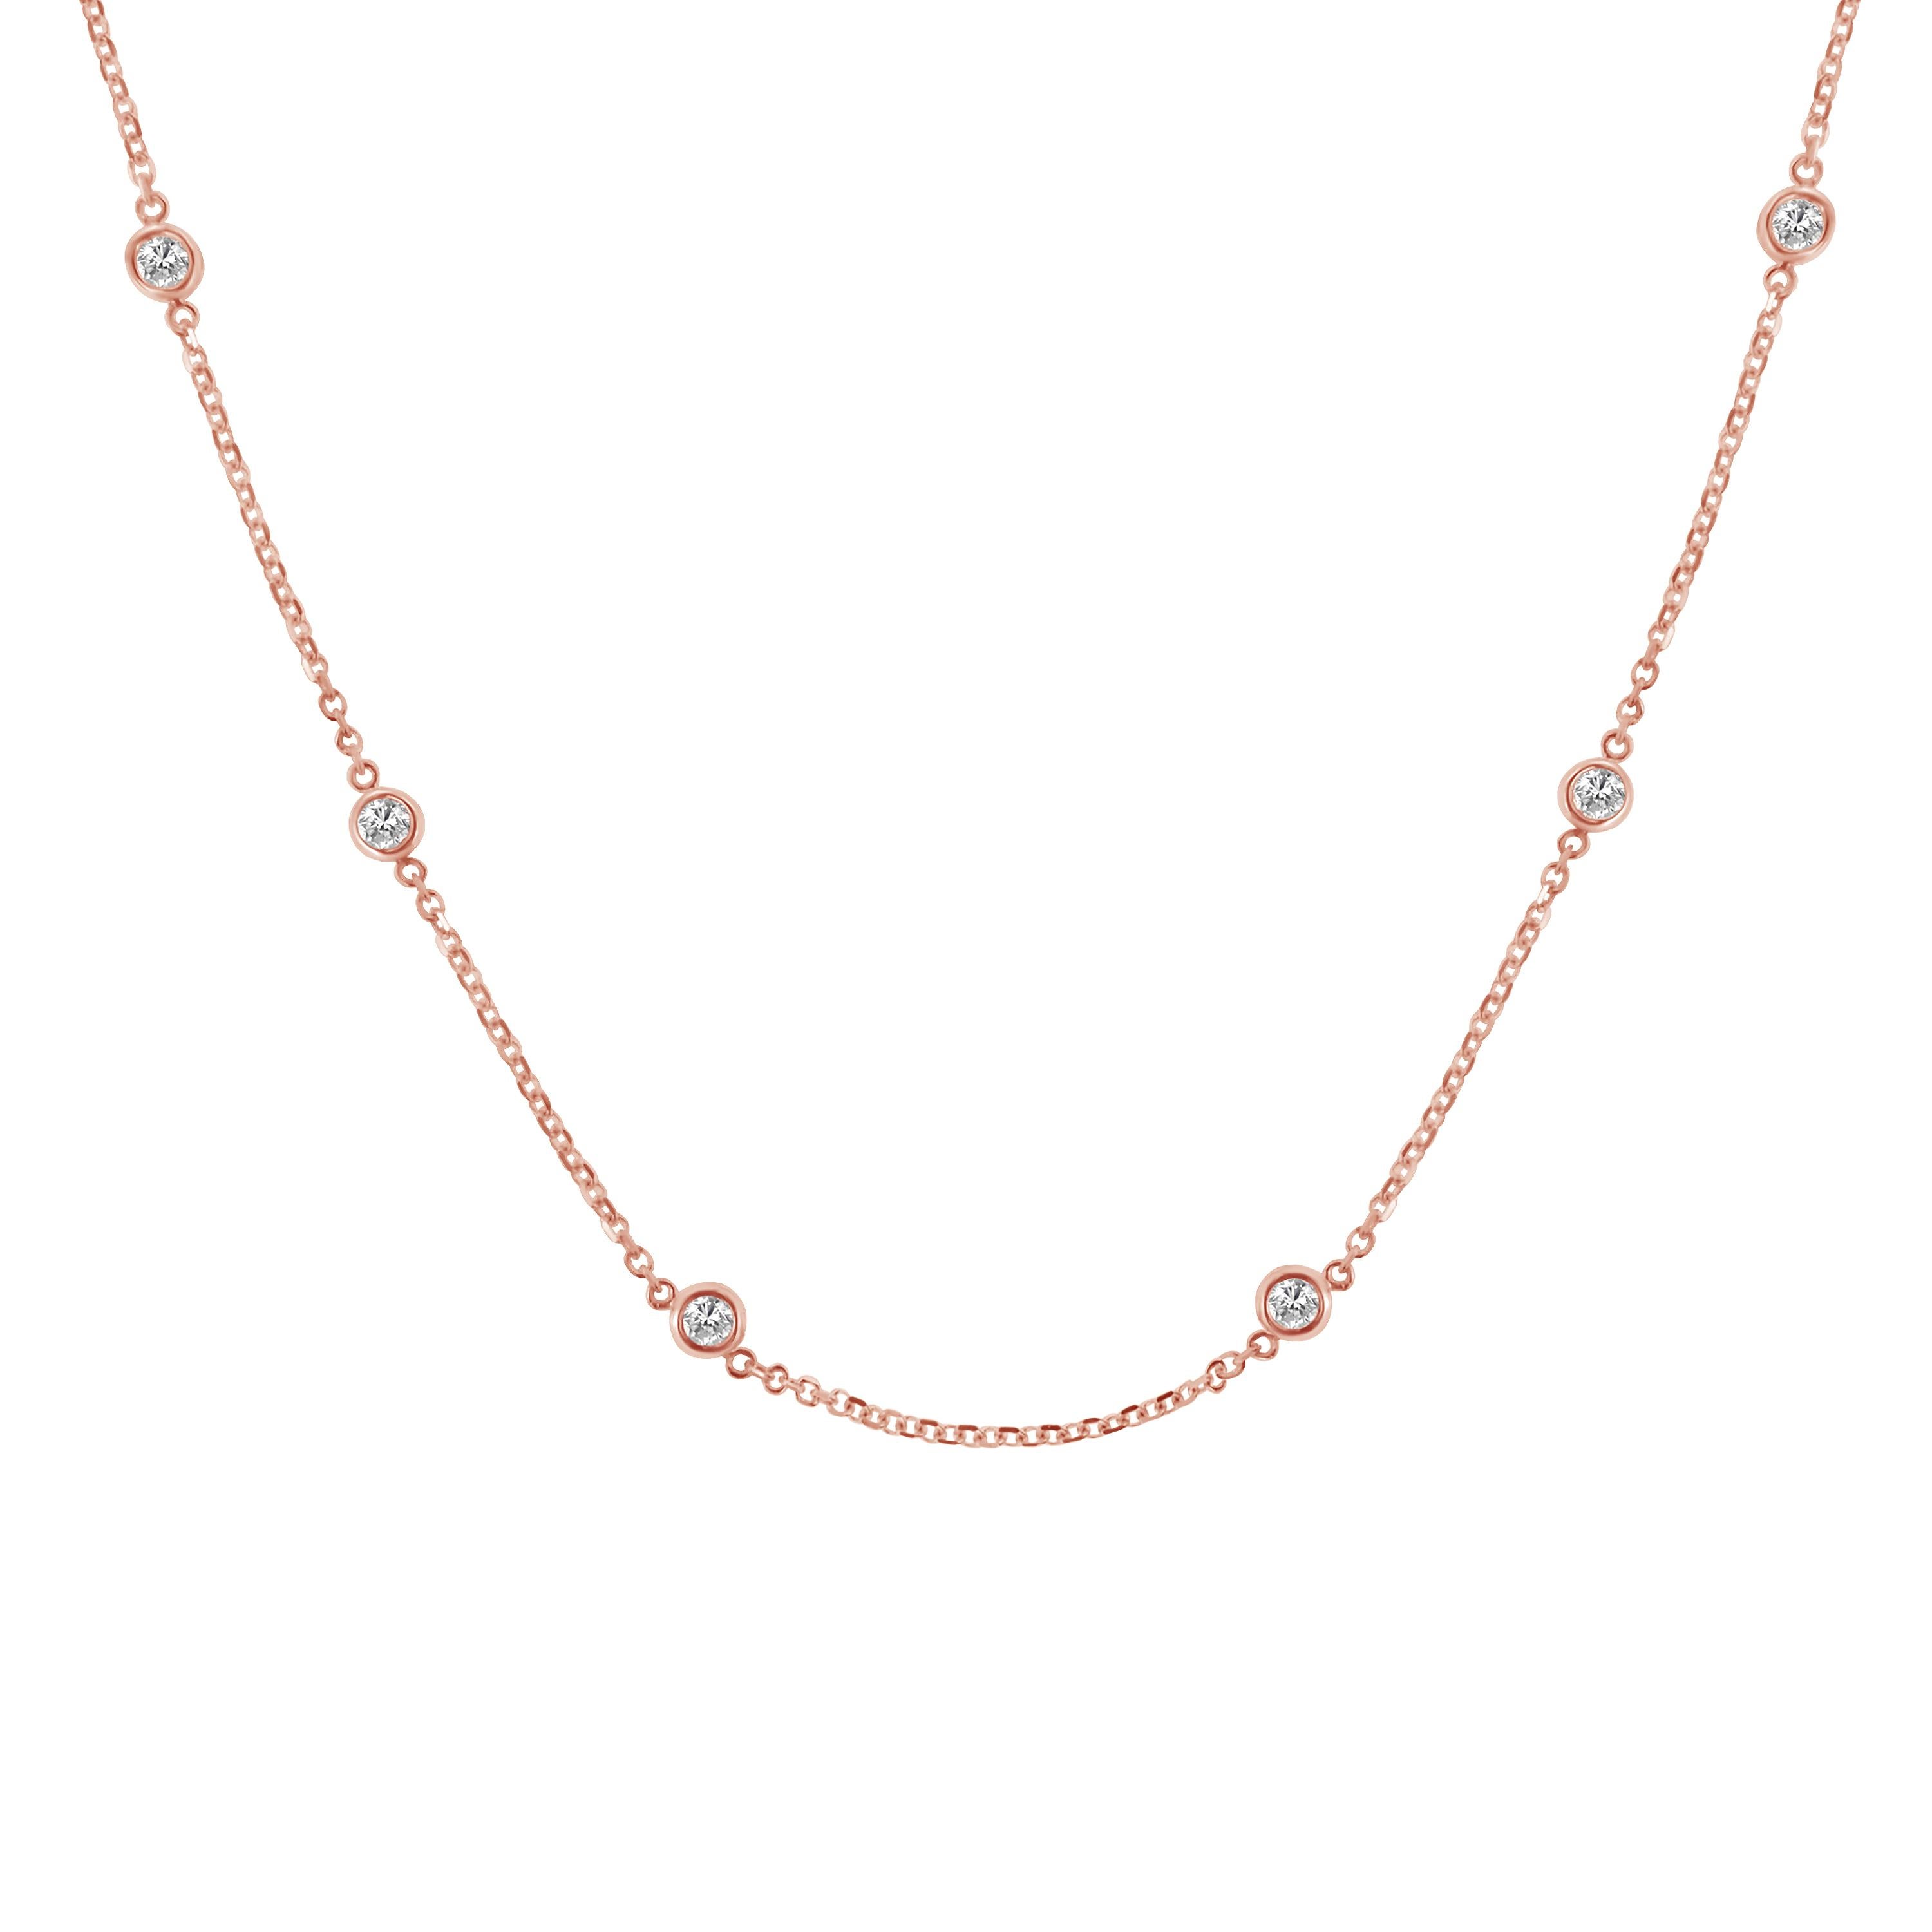 A great complement to both dressy and casual wear, this sterling silver, diamond station necklace, in your choice of white, yellow, and rose colors is extremely trendy, classy, and fashionable. Twelve brilliant cut round diamonds, weighing 1 carat